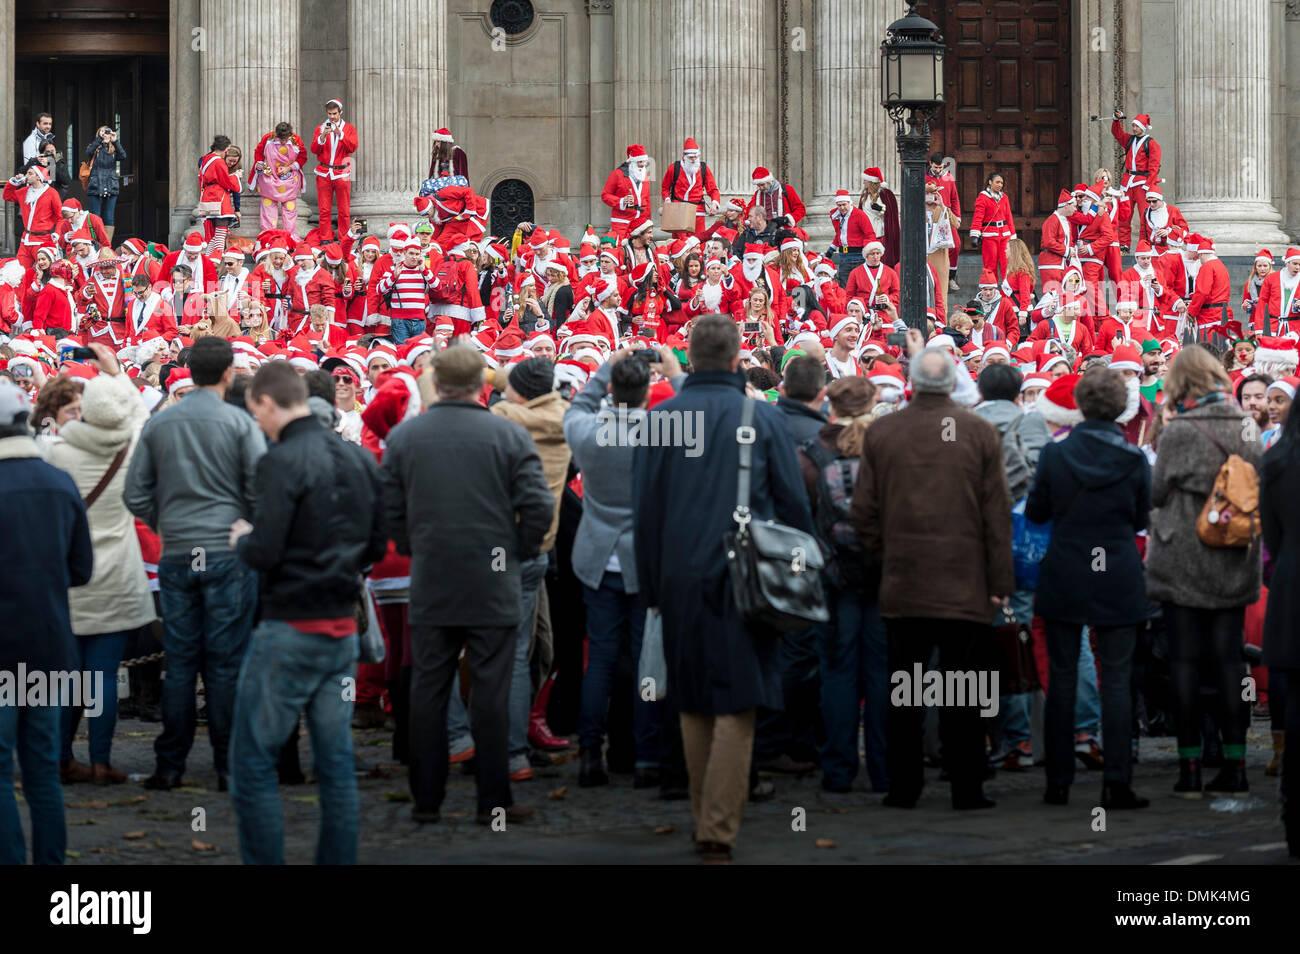 London, UK. 14th December, 2013.  Hundreds of Santas gathering on the steps of St Pauls Cathedral before they march off to meet up with groups of other Santas to celebrate the annual Santacon.  Photographer: Gordon Scammell/Alamy Live News Stock Photo